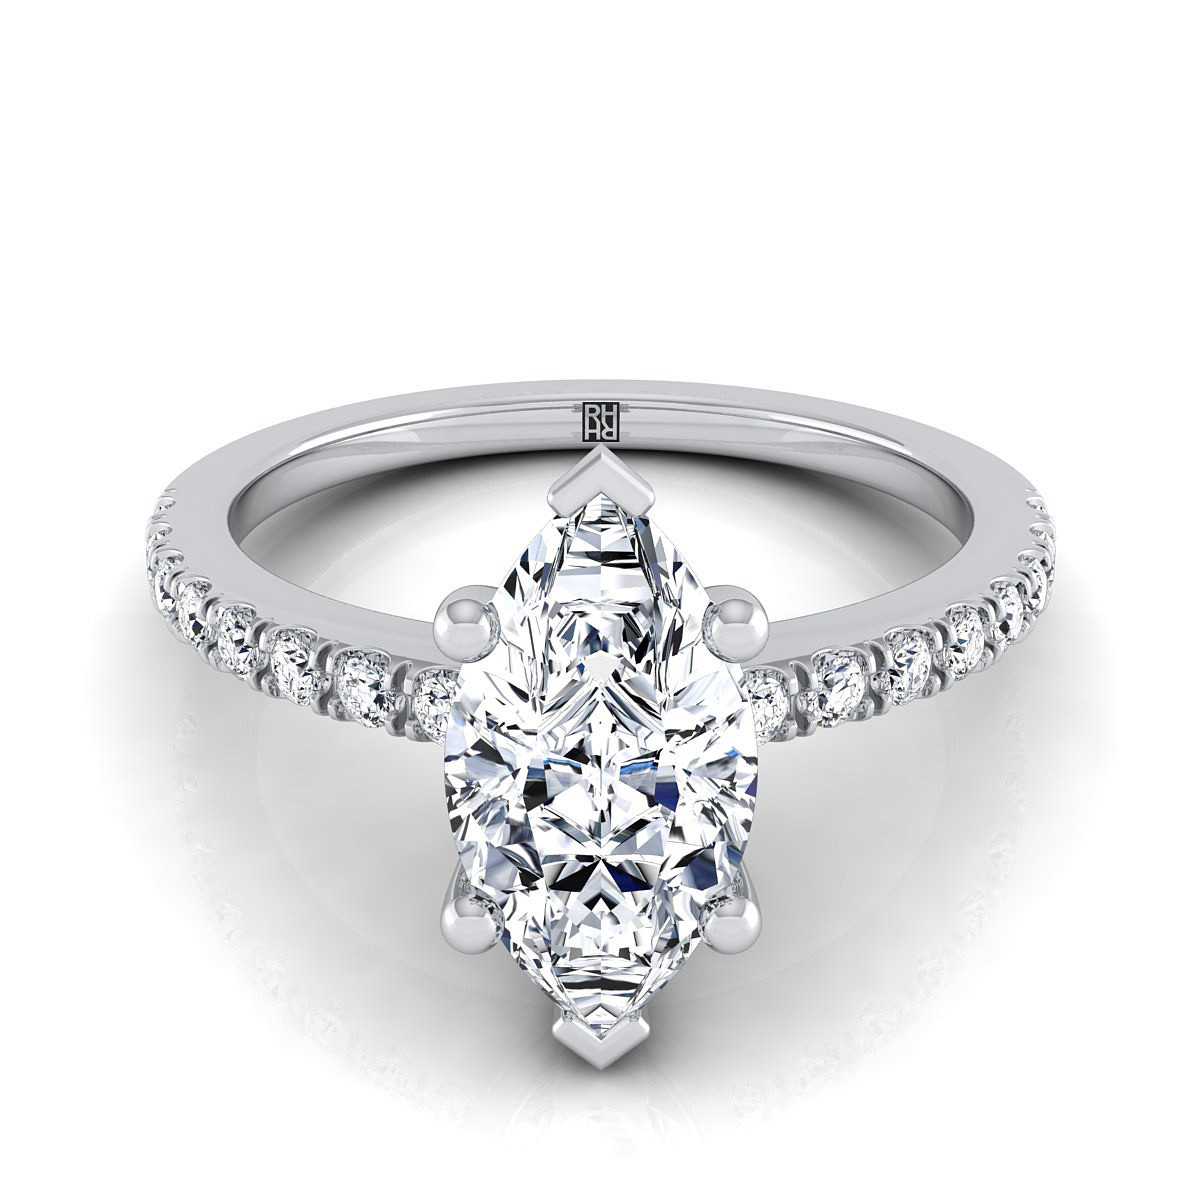 Marquise Diamond Engagement Rings
 Classic Marquise Diamond 4 Prong Engagement Ring 14k White